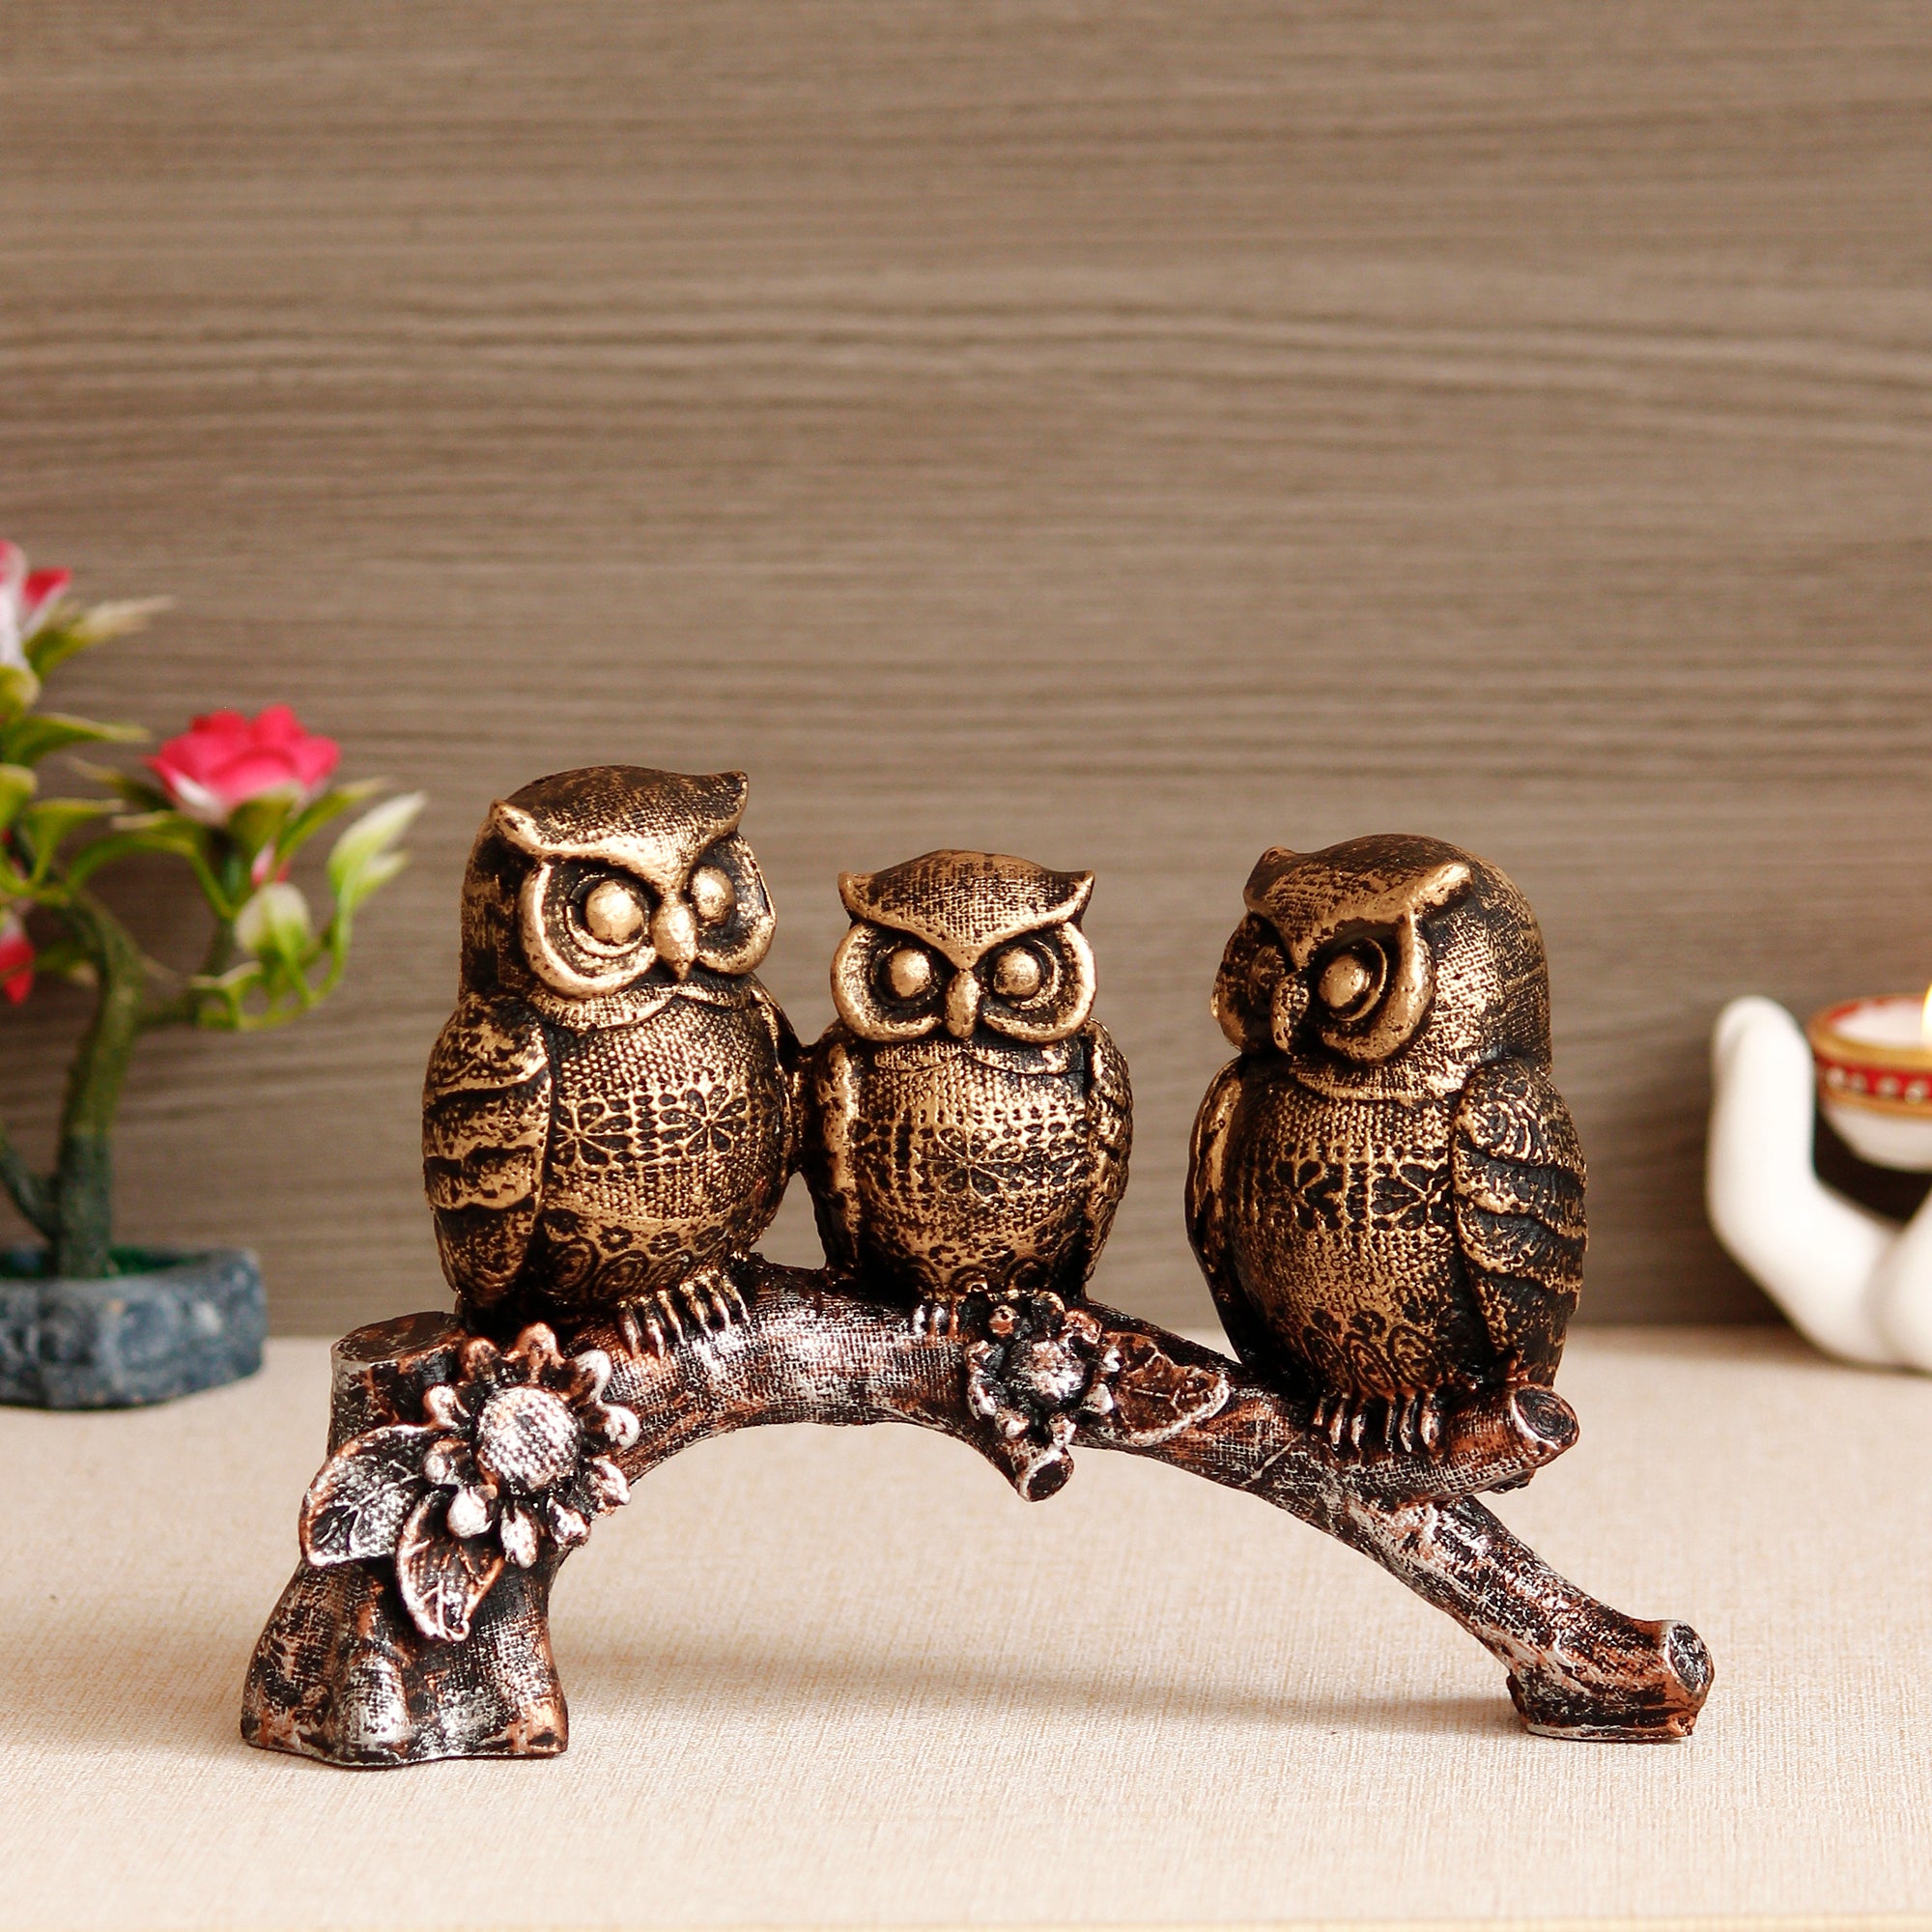 3 Owl Sitting on Branch Antique Finish Handcrafted Polyresin Decorative Showpiece